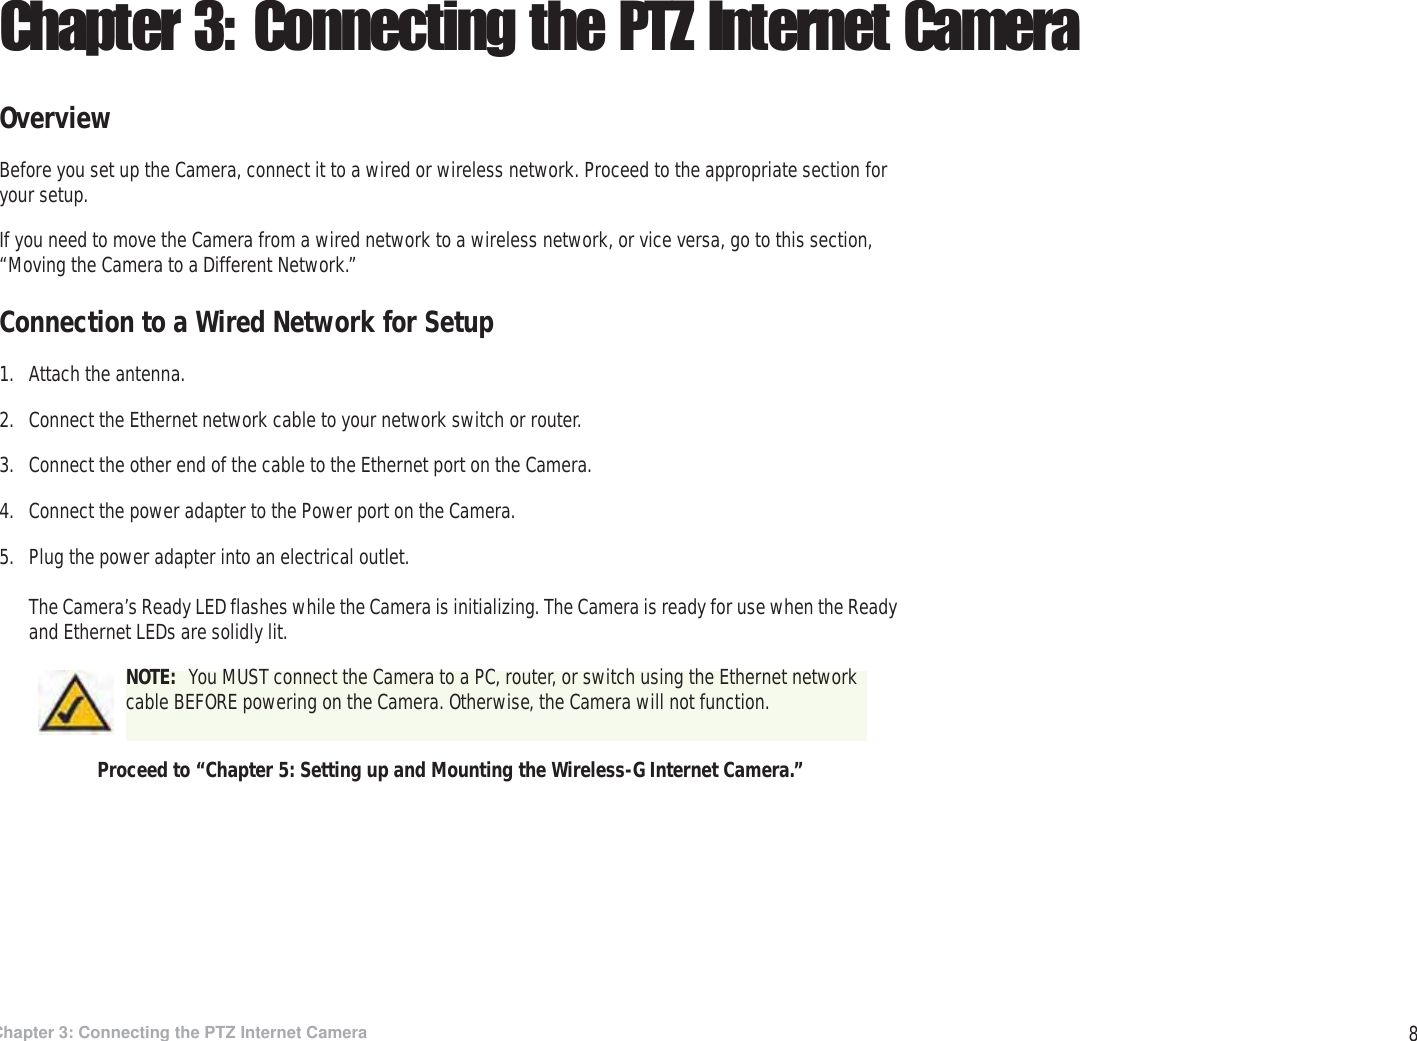 8Chapter 3: Connecting the PTZ Internet CameraOverviewWireless-G PTZ Internet Camera with AudioChapter 3: Connecting the PTZ Internet CameraOverviewBefore you set up the Camera, connect it to a wired or wireless network. Proceed to the appropriate section for your setup.If you need to move the Camera from a wired network to a wireless network, or vice versa, go to this section, “Moving the Camera to a Different Network.”Connection to a Wired Network for Setup1. Attach the antenna.2. Connect the Ethernet network cable to your network switch or router.3. Connect the other end of the cable to the Ethernet port on the Camera.4. Connect the power adapter to the Power port on the Camera.5. Plug the power adapter into an electrical outlet.The Camera’s Ready LED flashes while the Camera is initializing. The Camera is ready for use when the Ready and Ethernet LEDs are solidly lit.Proceed to “Chapter 5: Setting up and Mounting the Wireless-G Internet Camera.”NOTE:  You MUST connect the Camera to a PC, router, or switch using the Ethernet network cable BEFORE powering on the Camera. Otherwise, the Camera will not function.